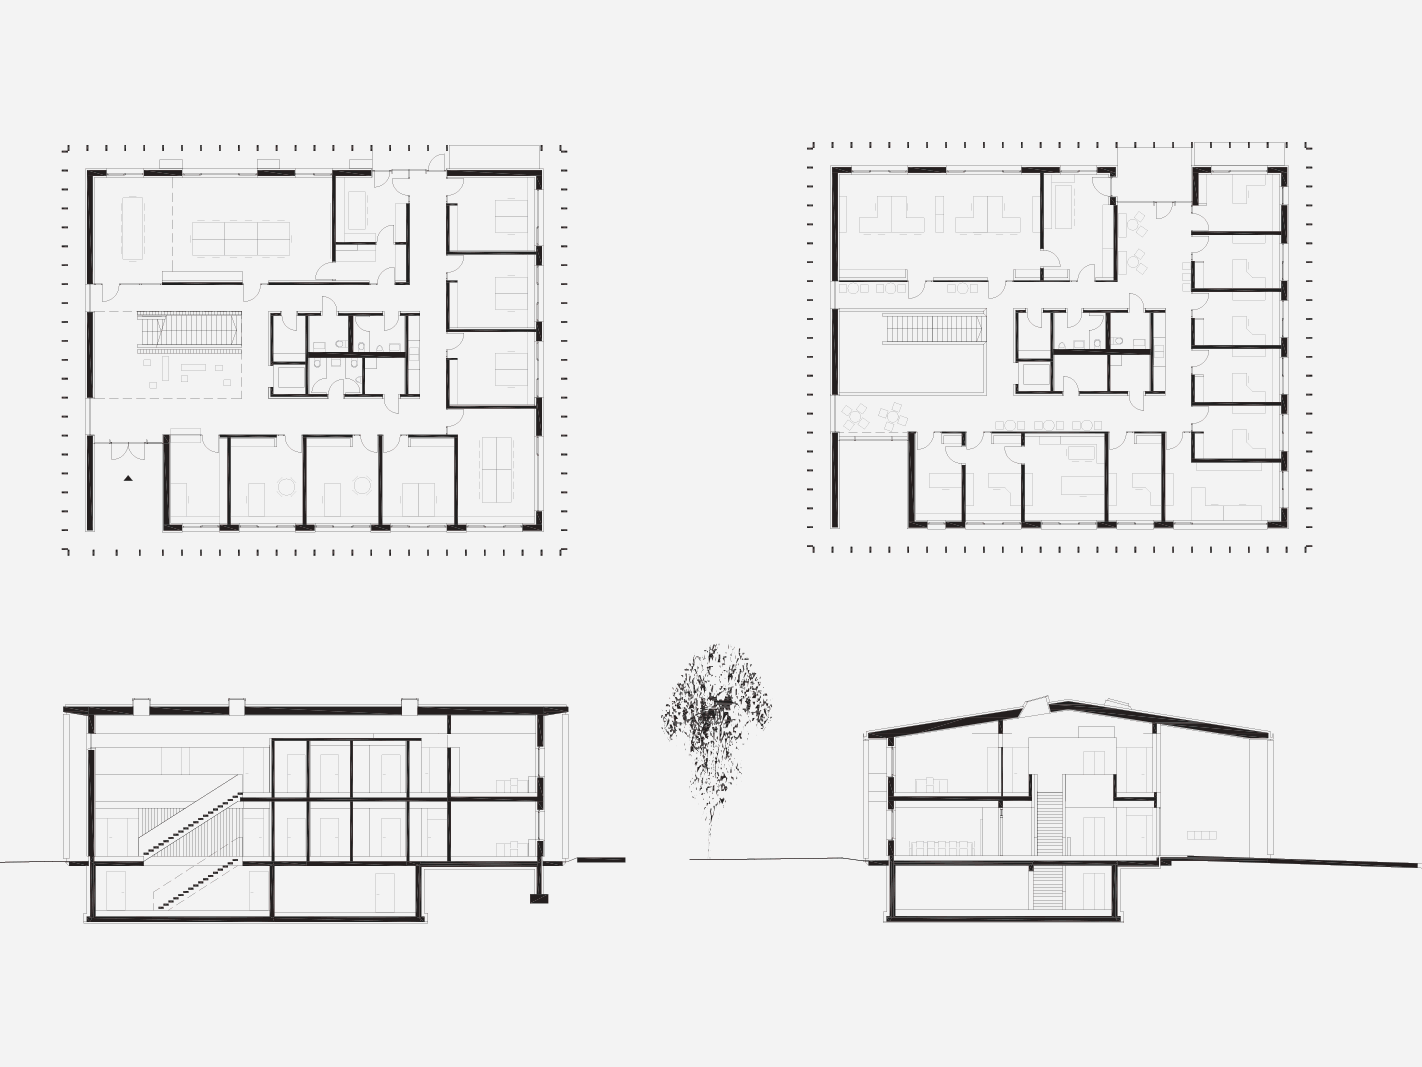 On the picture are 4 sketches of the argiculture centre. Different views are shown, as well as the interior structure of the building.